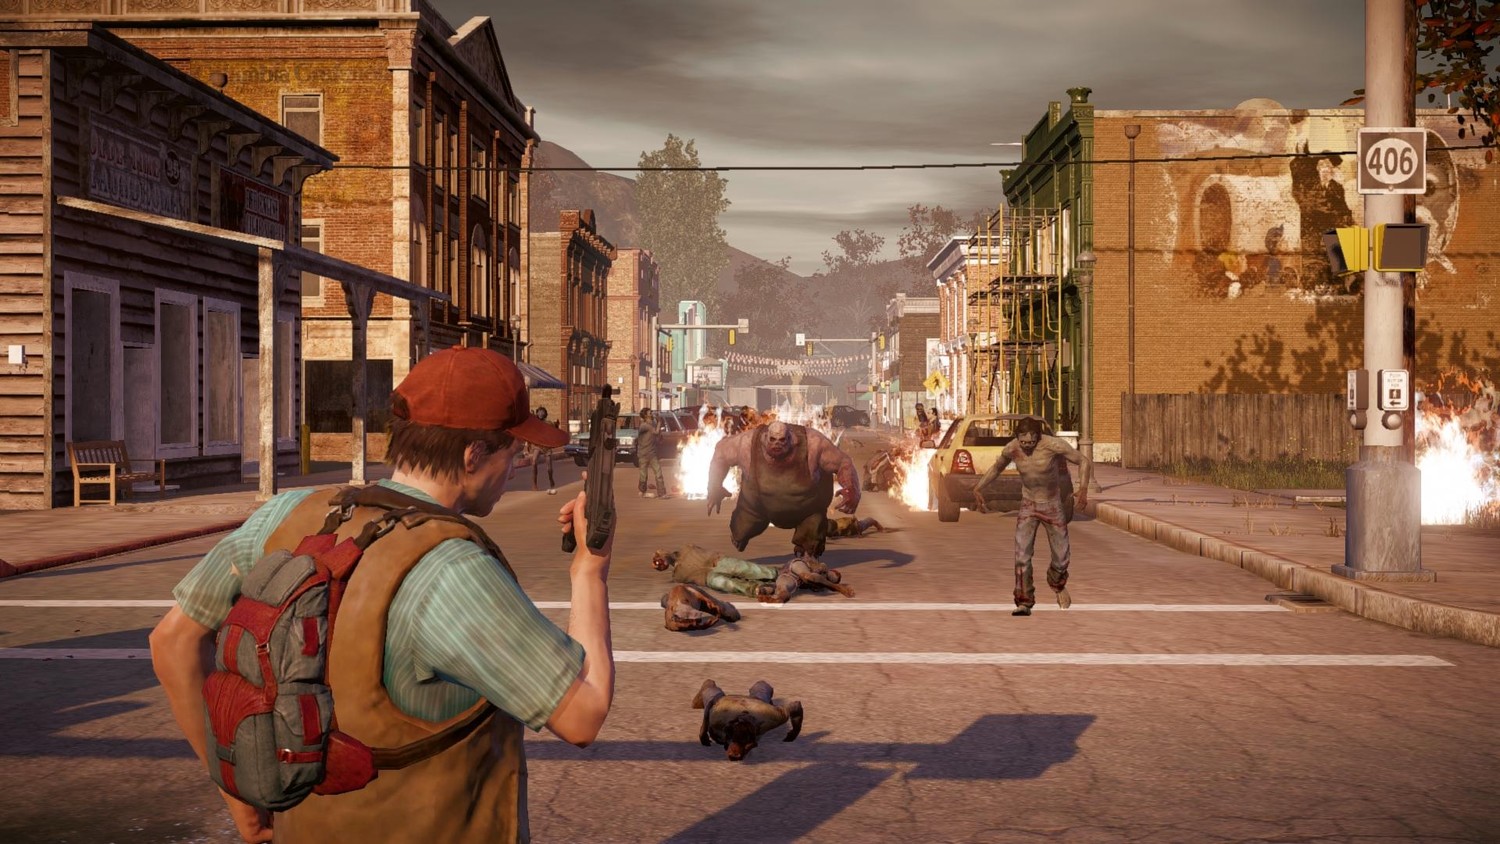 Screenshot for the game State of Decay 2 Juggernaut Edition [1.0 Update 25 build 437296] (2020) download torrent RePack